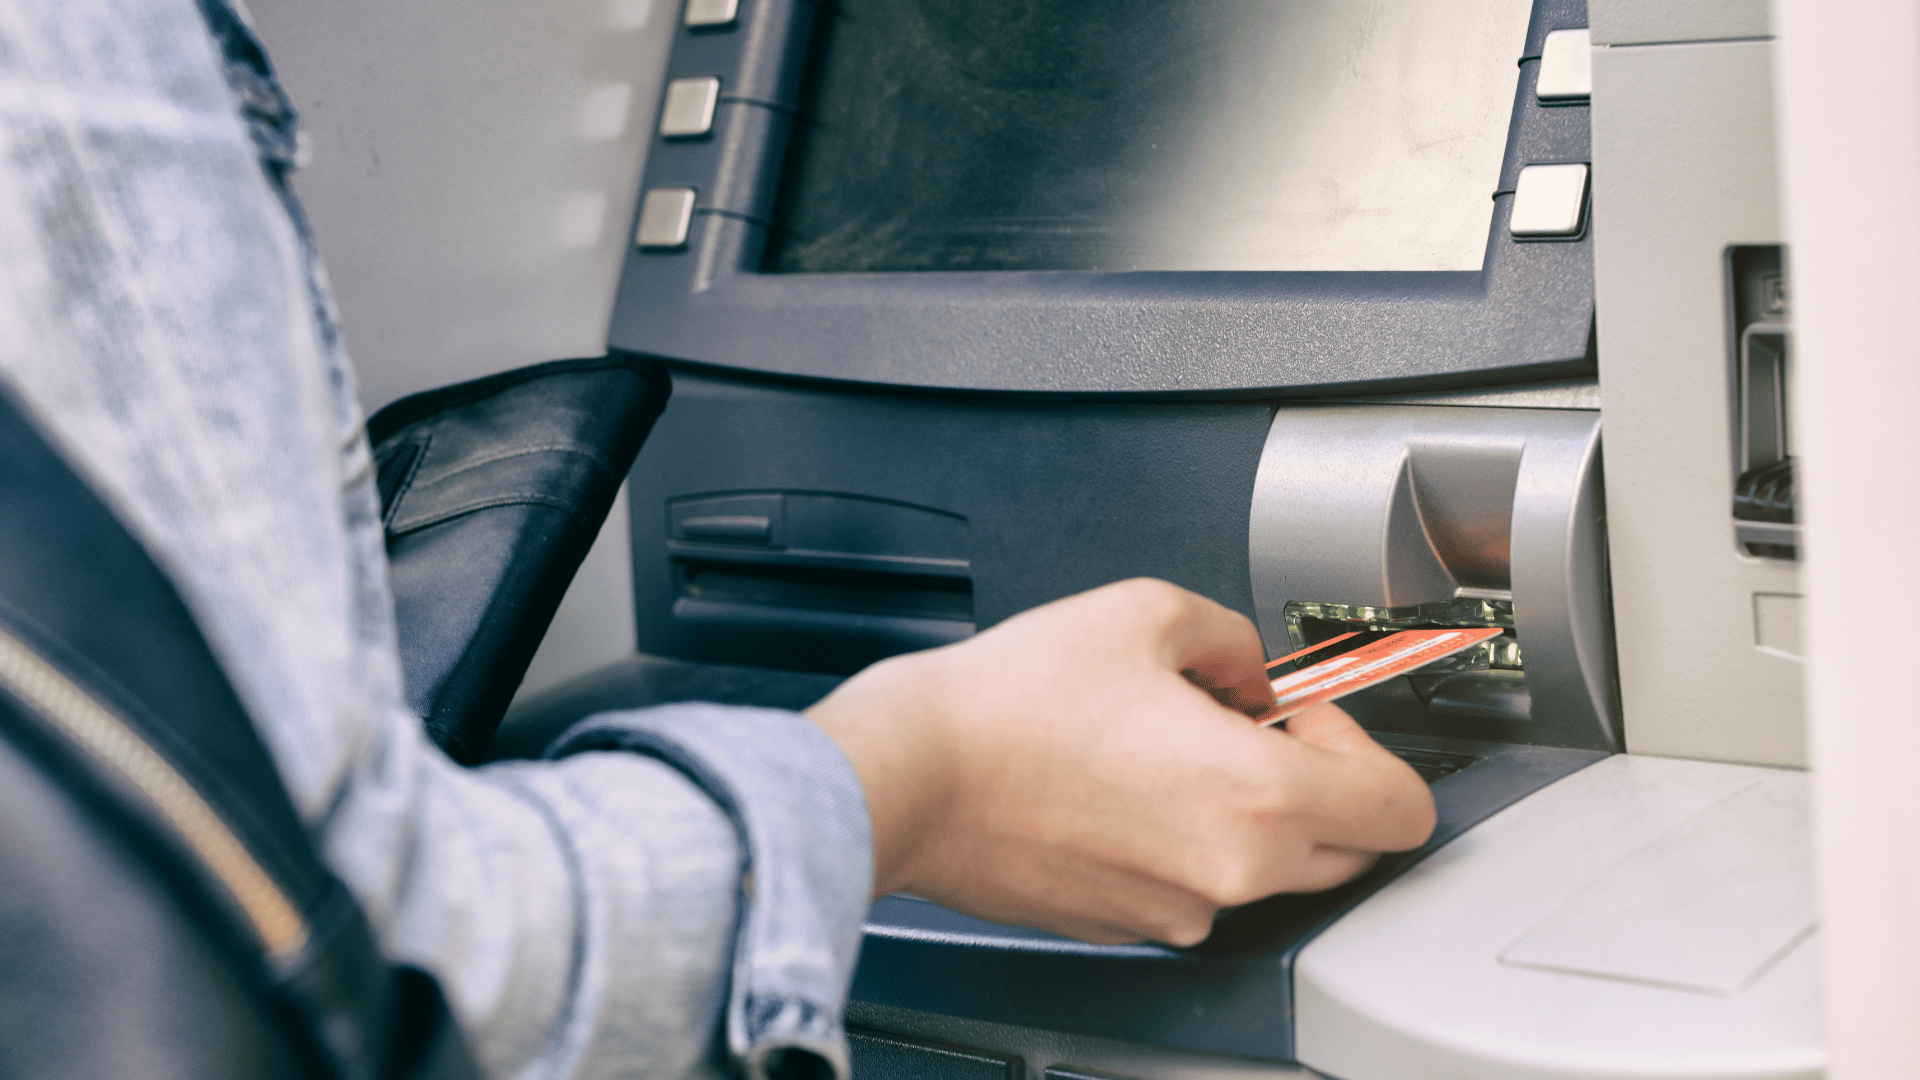 Person inserting a card into an ATM